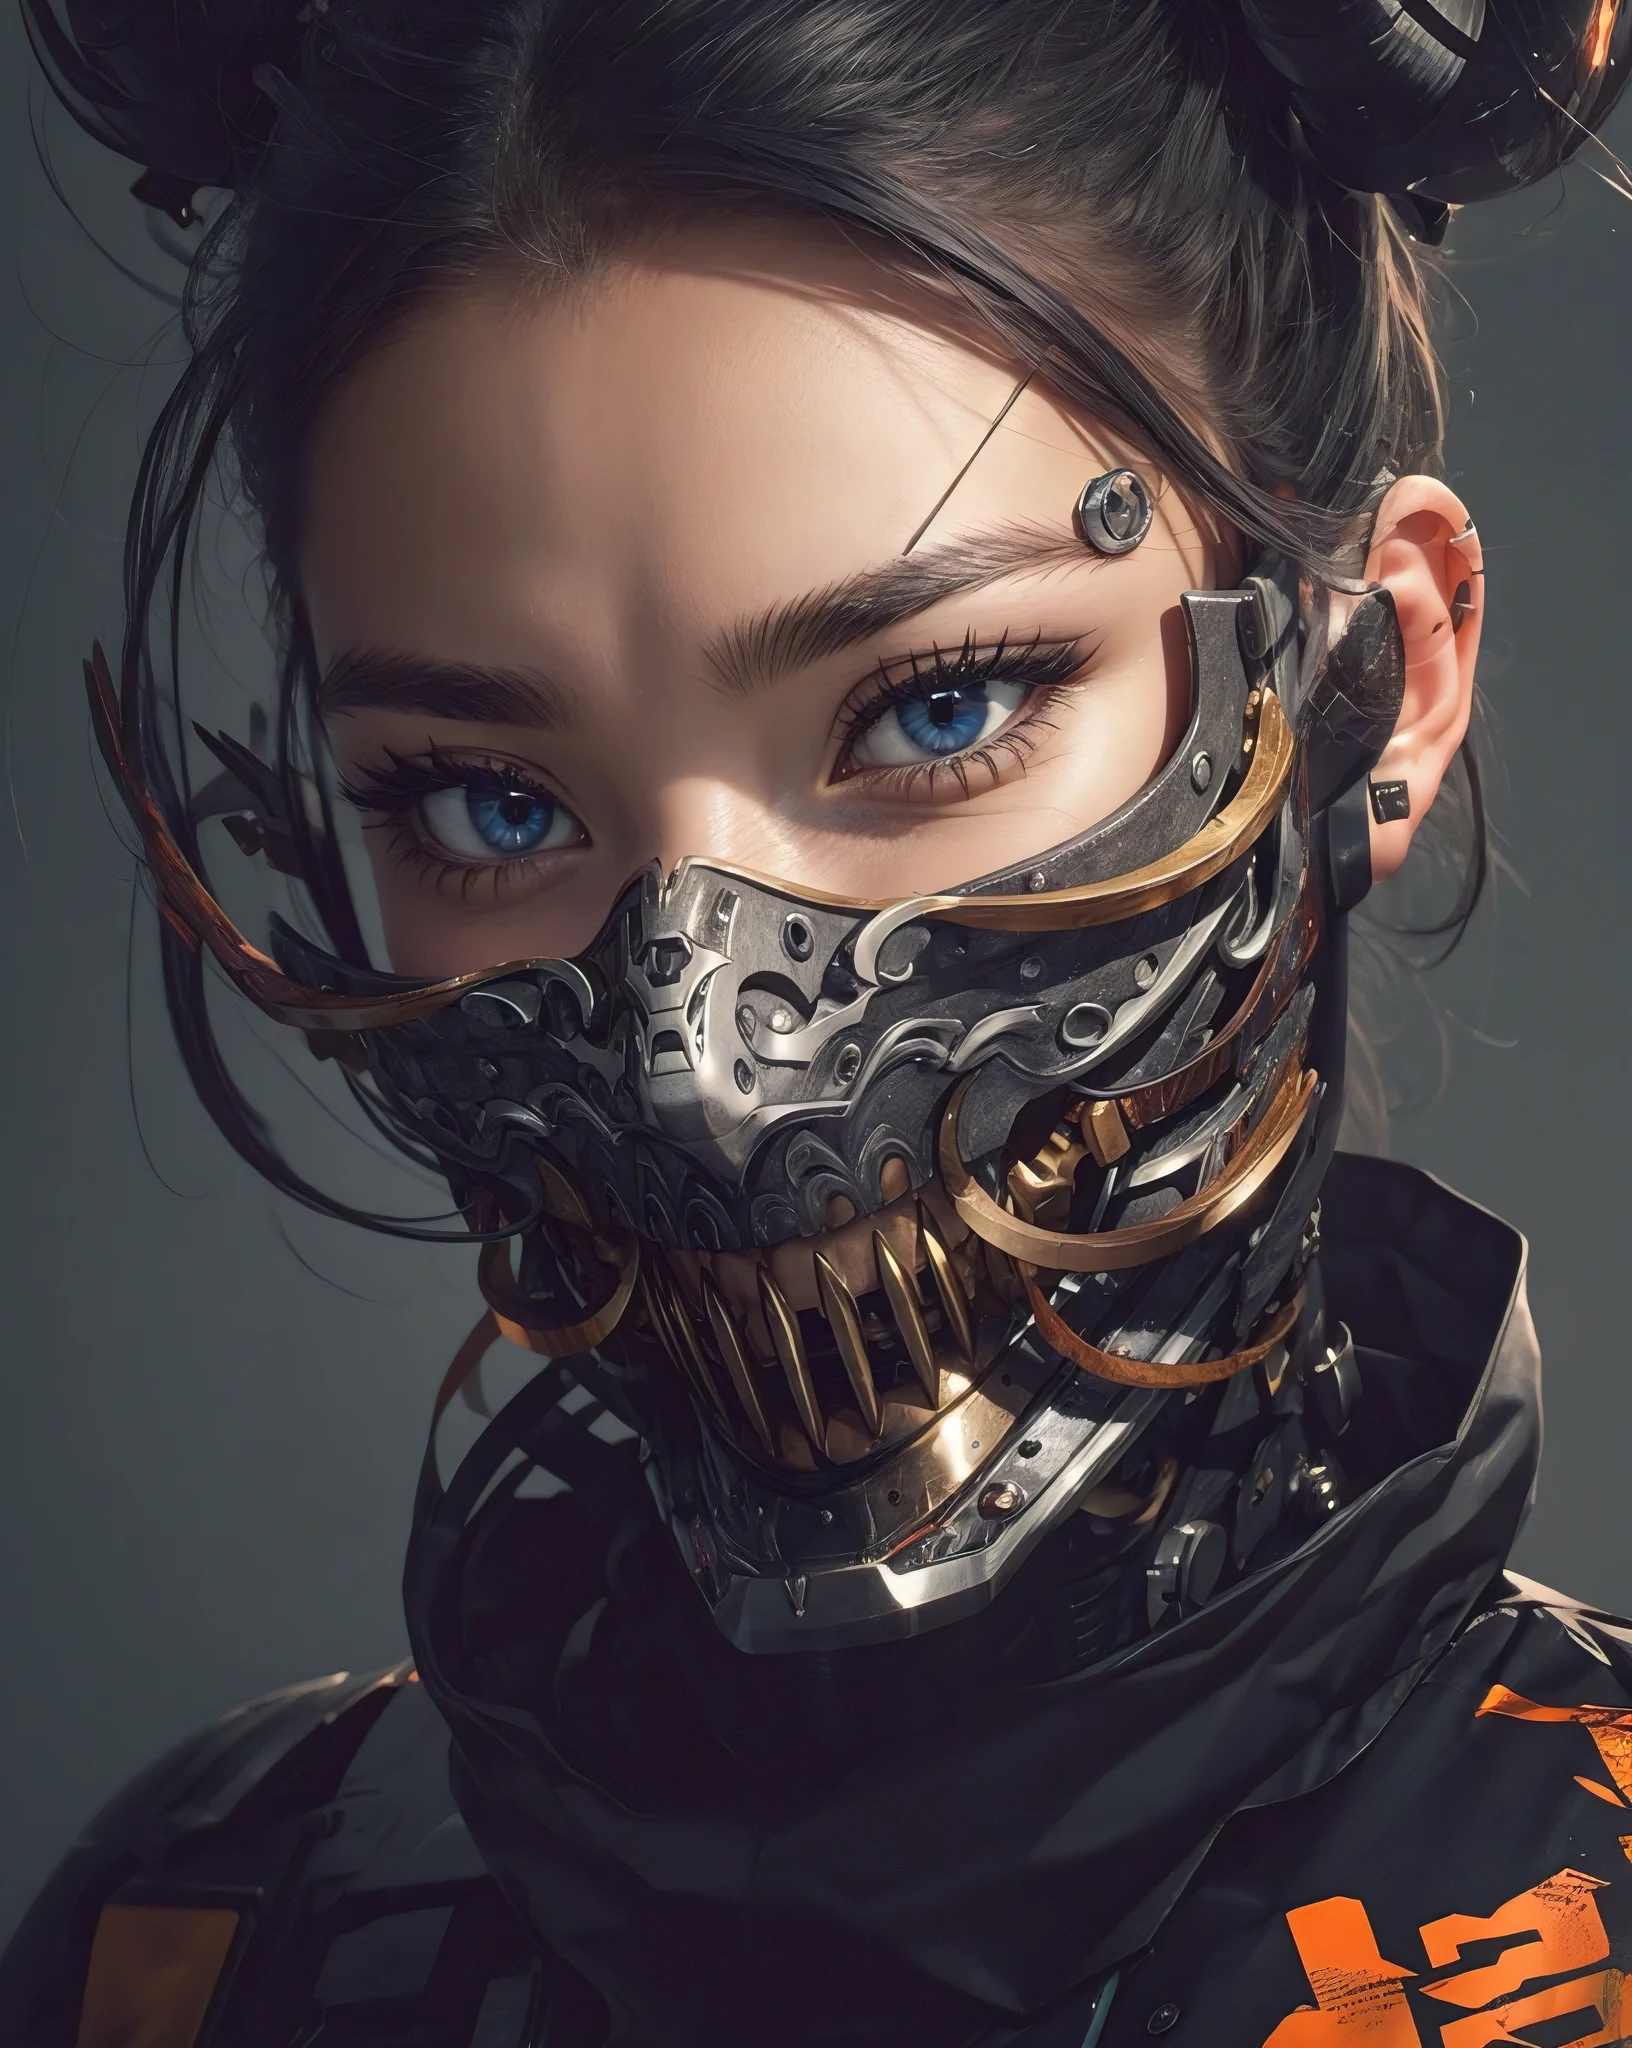 Hyper realistic portrait of woman with mecha demon horns, best quality, realistic skin texture, dark core ghostly expressive features, street wear futuristic clothing with multiple cloth fastenings and different materials, layered textures, nasa materials, absurd and weird cyberpunk facemask, the face mask has features of a mecha demonic beasts made of glossy plastic and shiny metal, neon accents, glowing Japanese kanjis, her beautiful eyes stand out, by Francis bacon, uhd, 8K